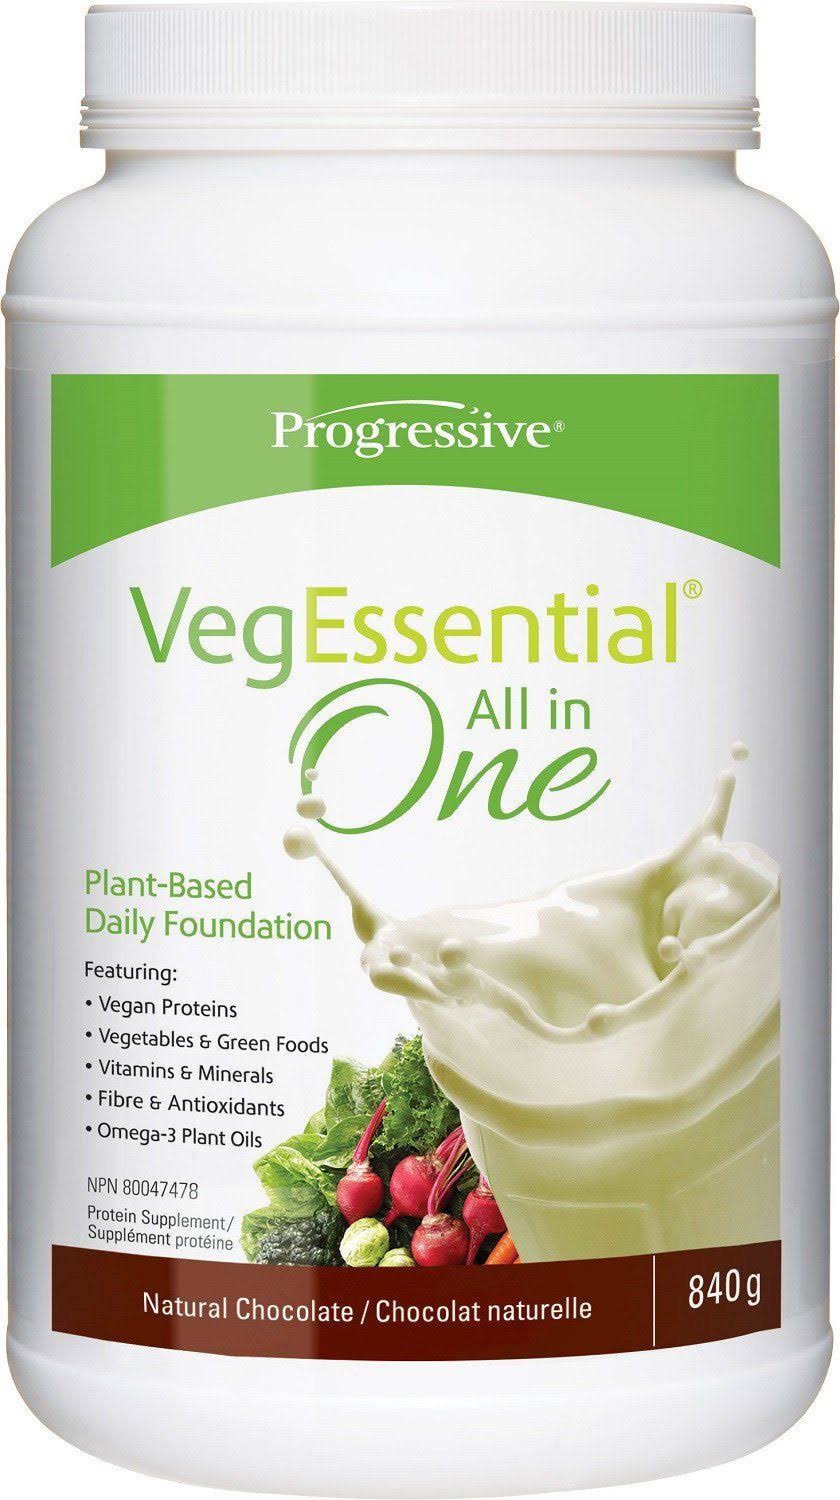 Progressive VegEssential All in One - 1008g, Natural Chocolate